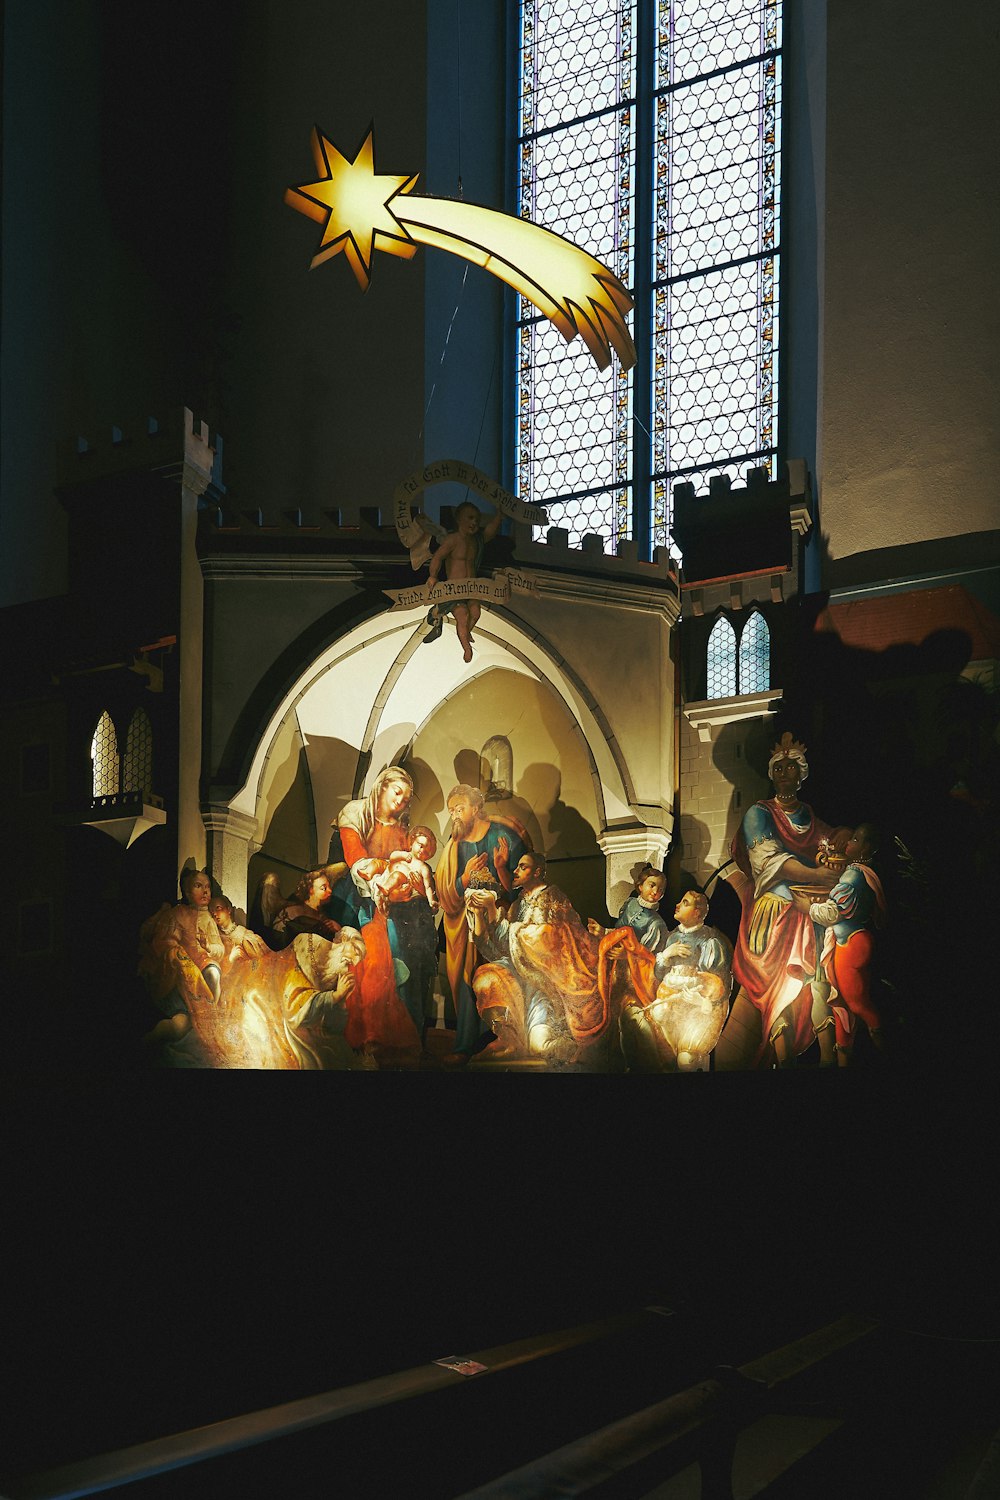 a nativity scene with a star above it